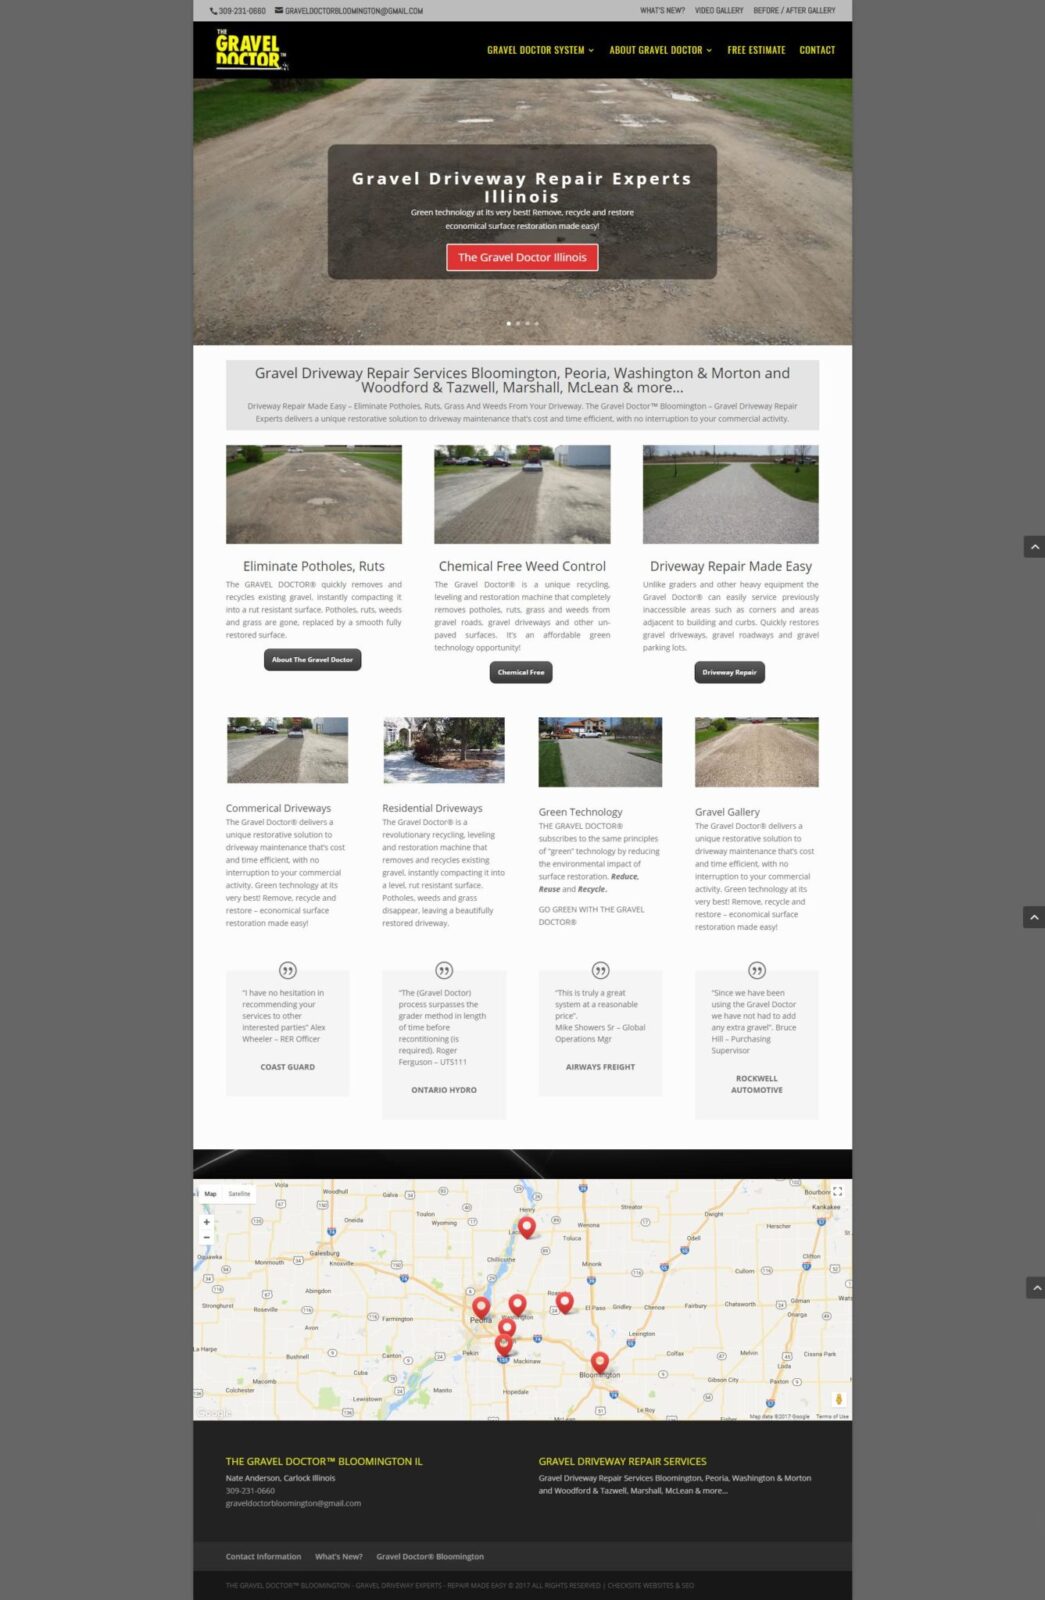 Gravel Driveway Repair Services Bloomington, Peoria, Washington & Morton and Woodford & Tazwell, Marshall, McLean & more…